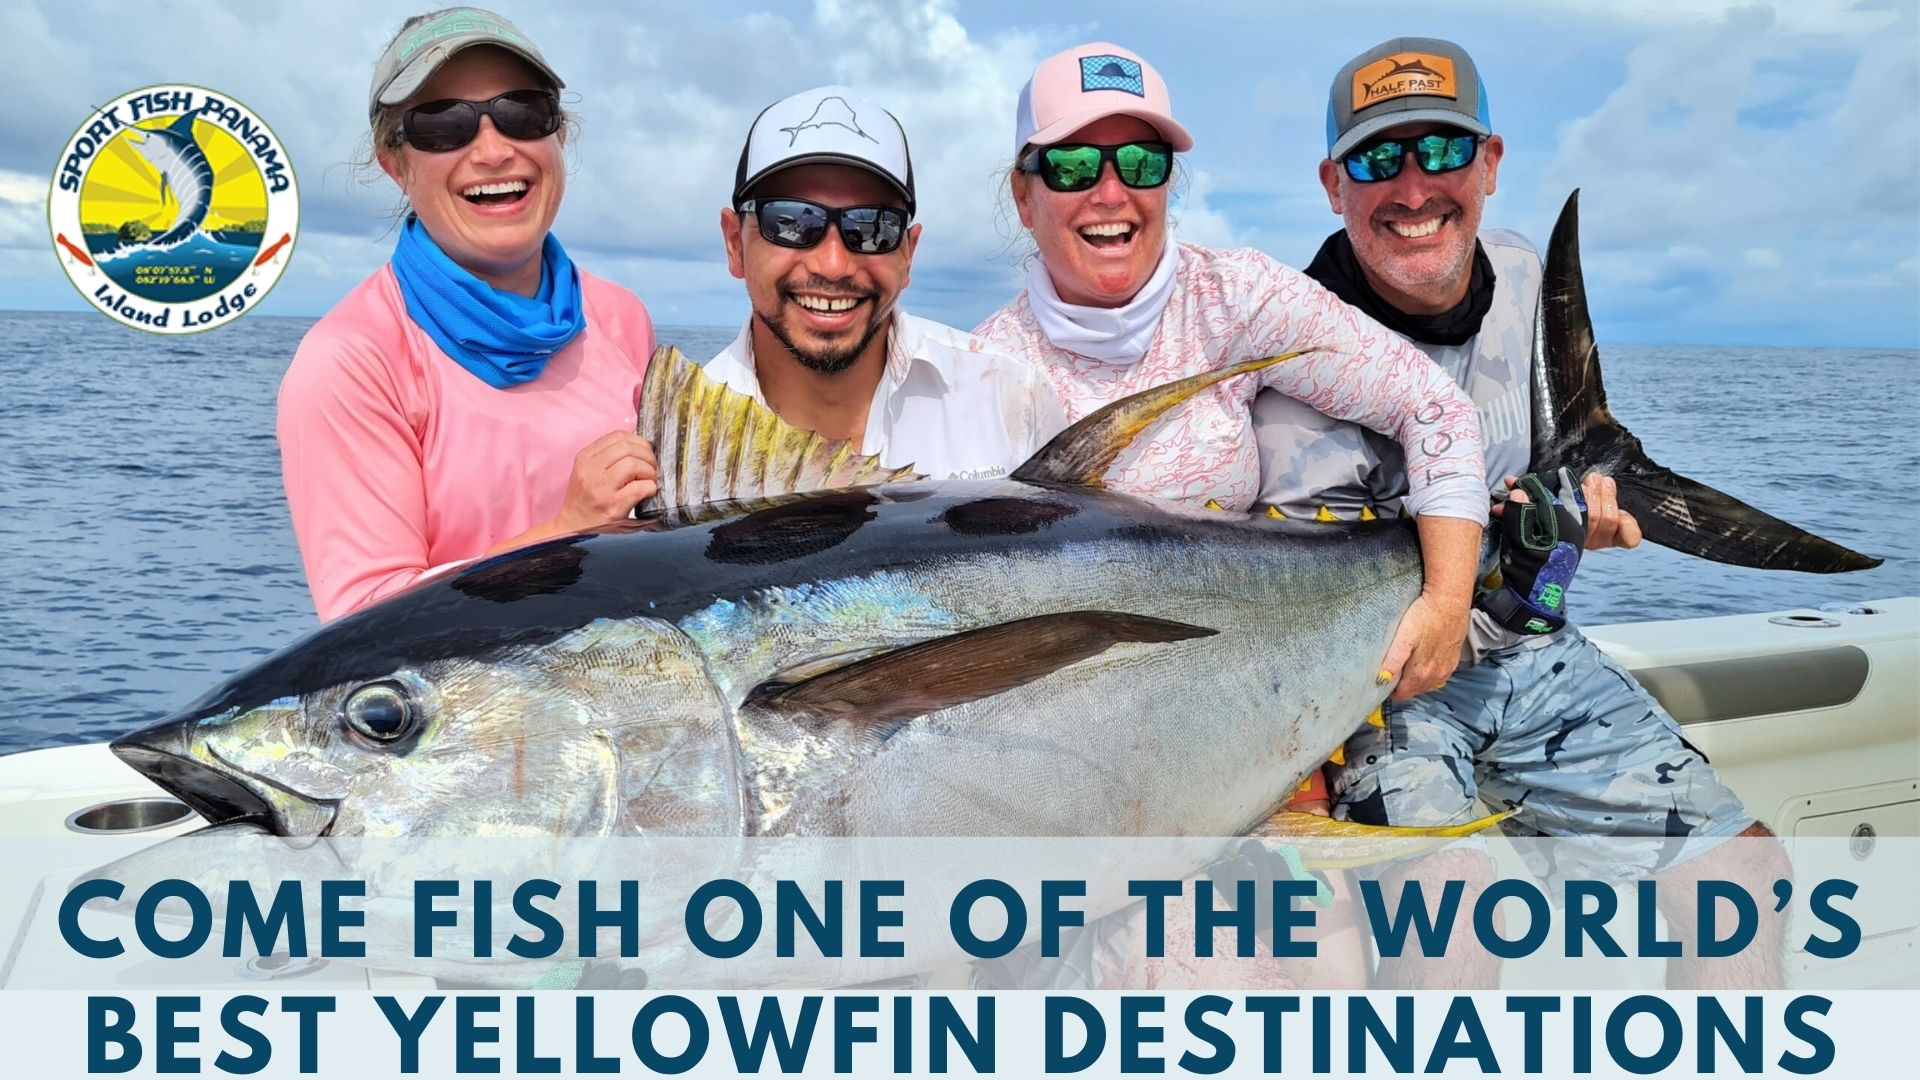 Come Fish One of The World's Best Yellowfin Tuna Destinations